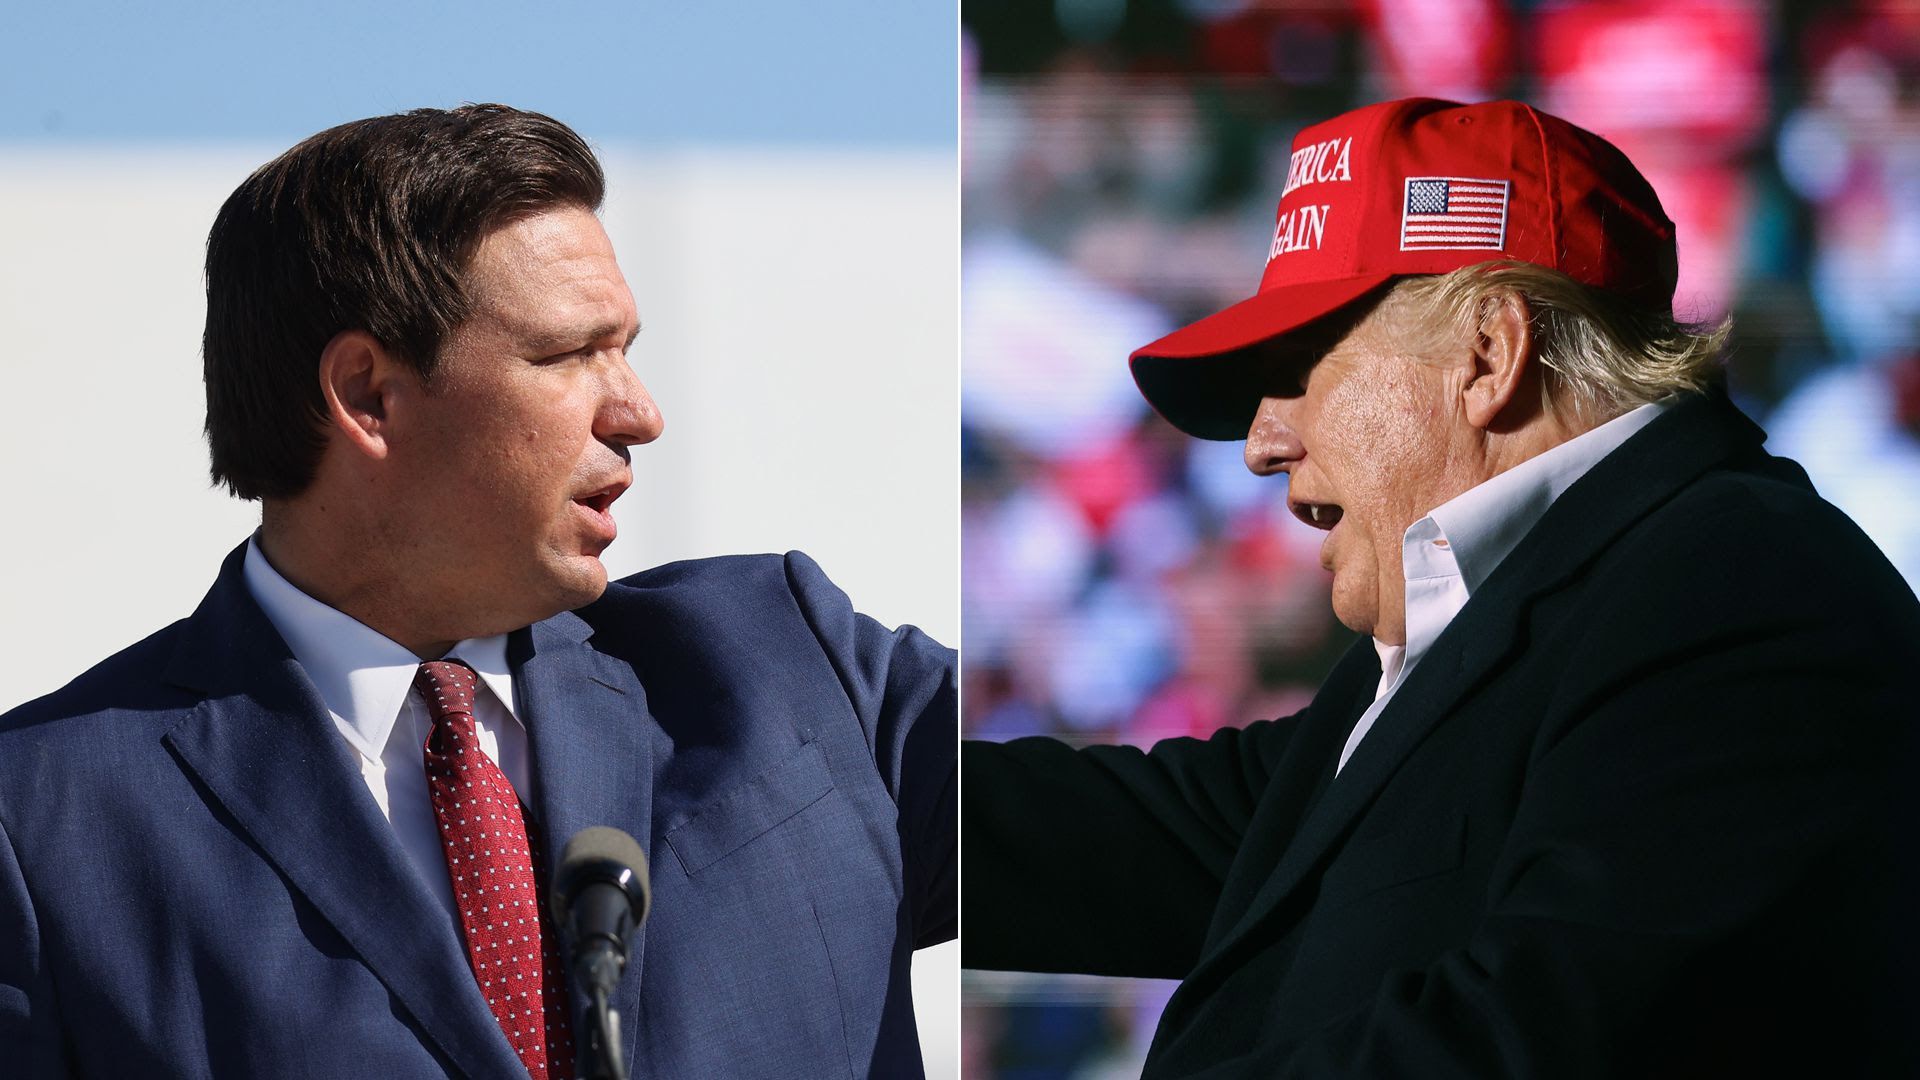 Ron DeSantis and Donald Trump speaking at rallies, the images side by side 